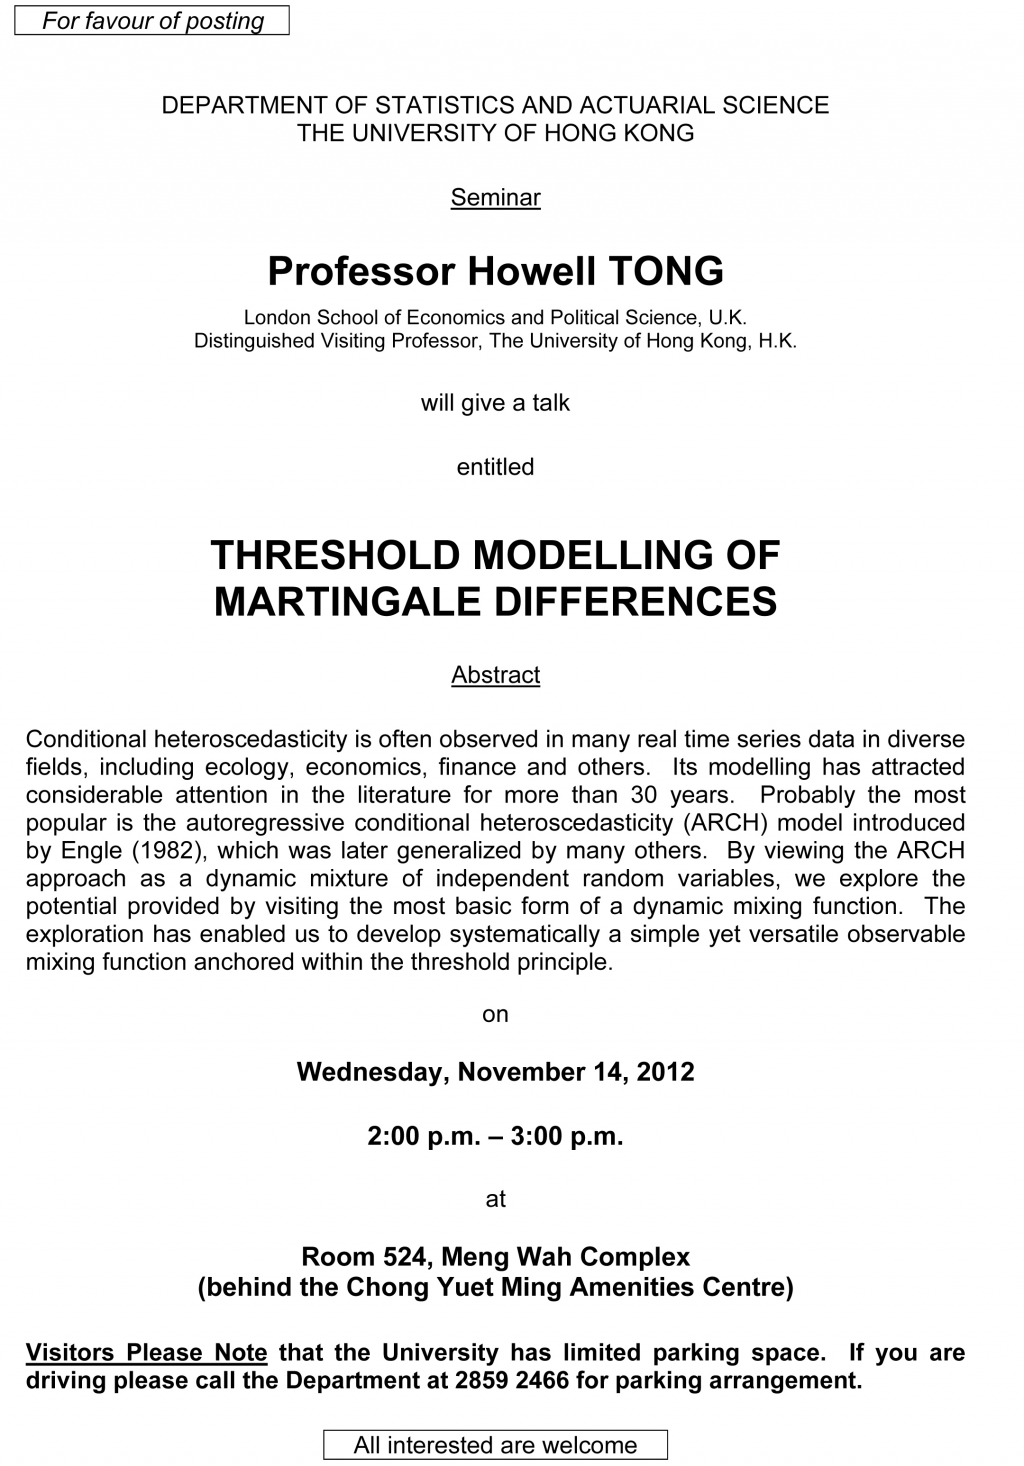 Seminar on 'Threshold modelling of martingale differences' by Professor Howell TONG